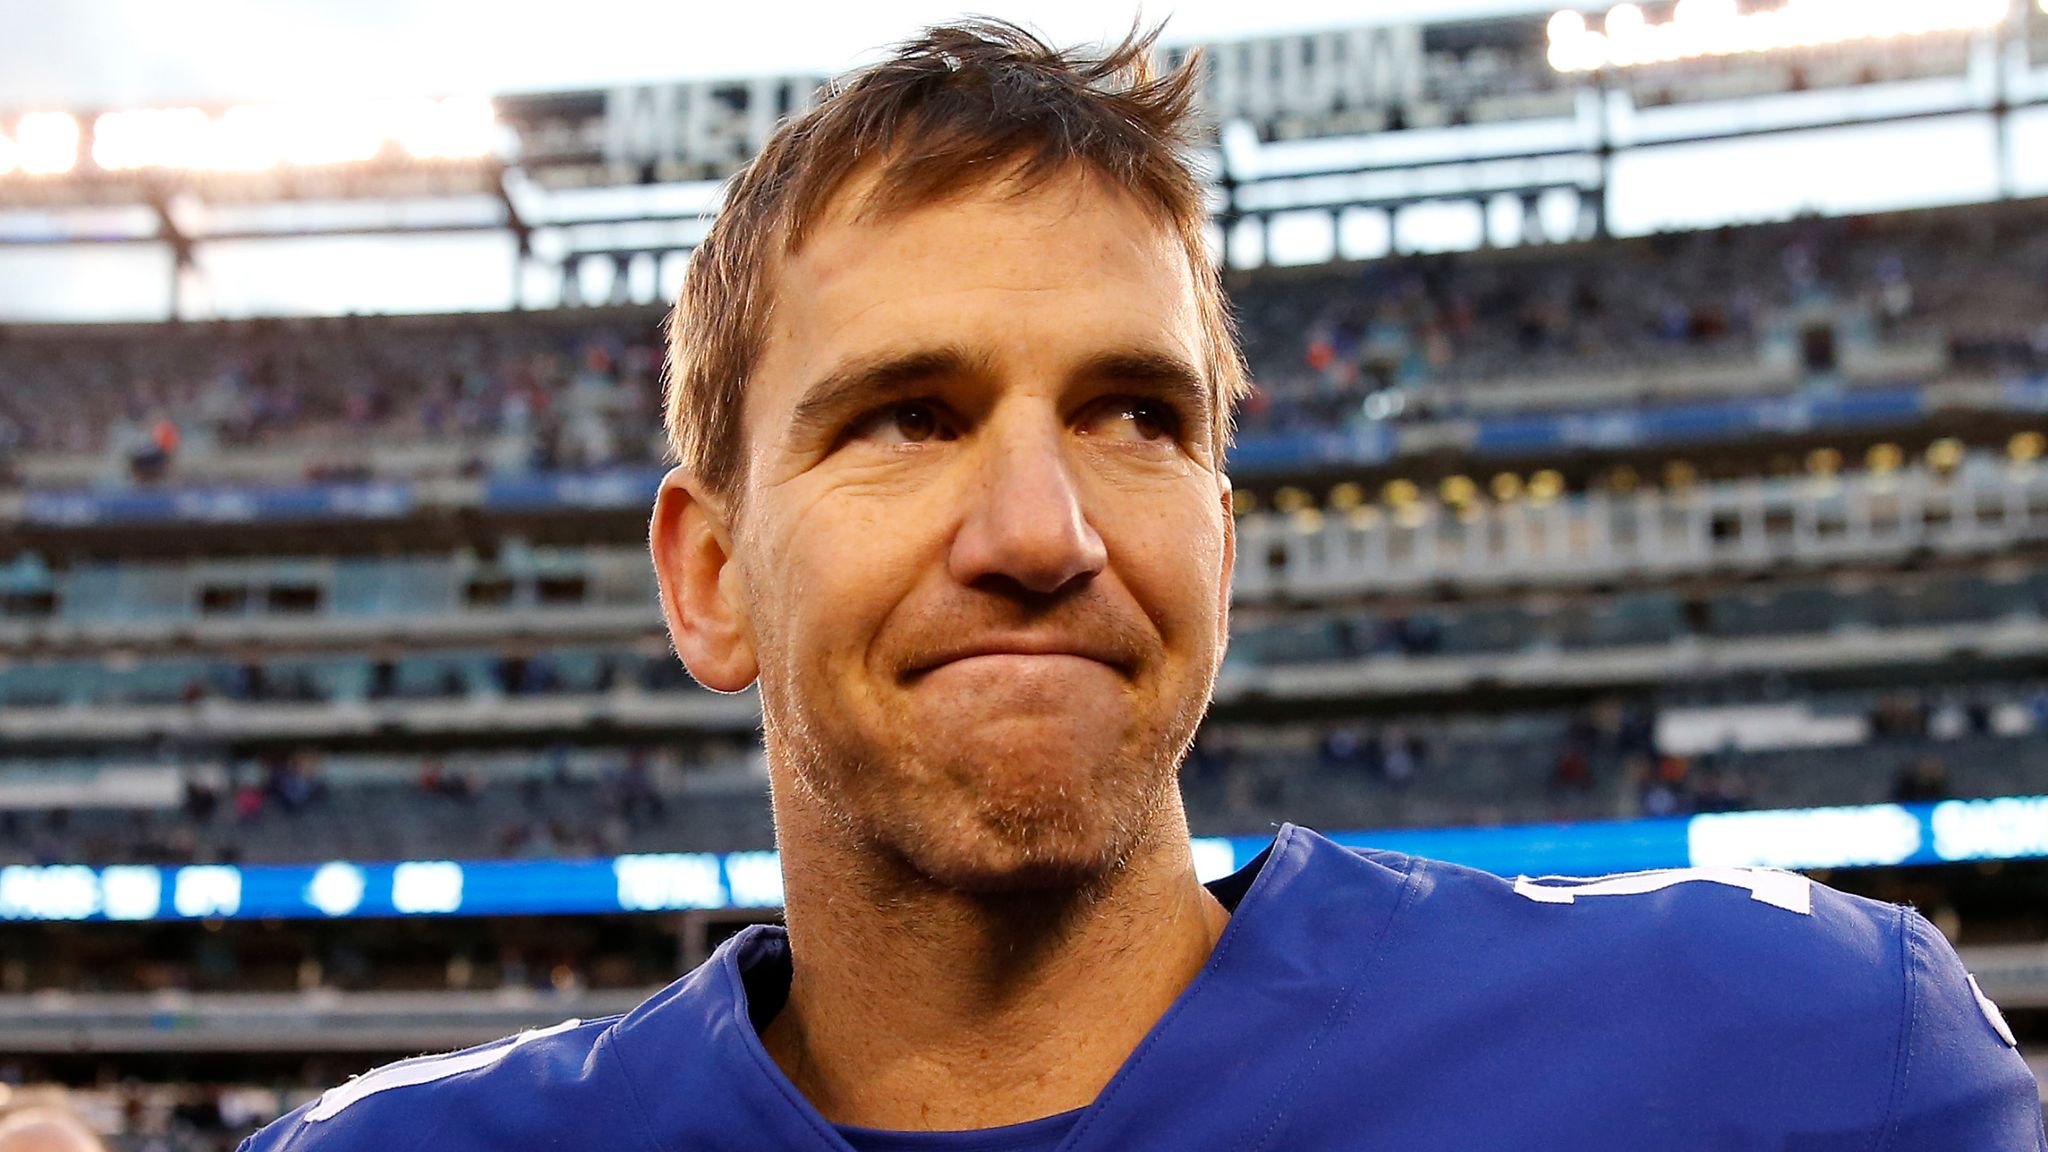 Giants' Eli Manning to announce retirement Friday, ending one of